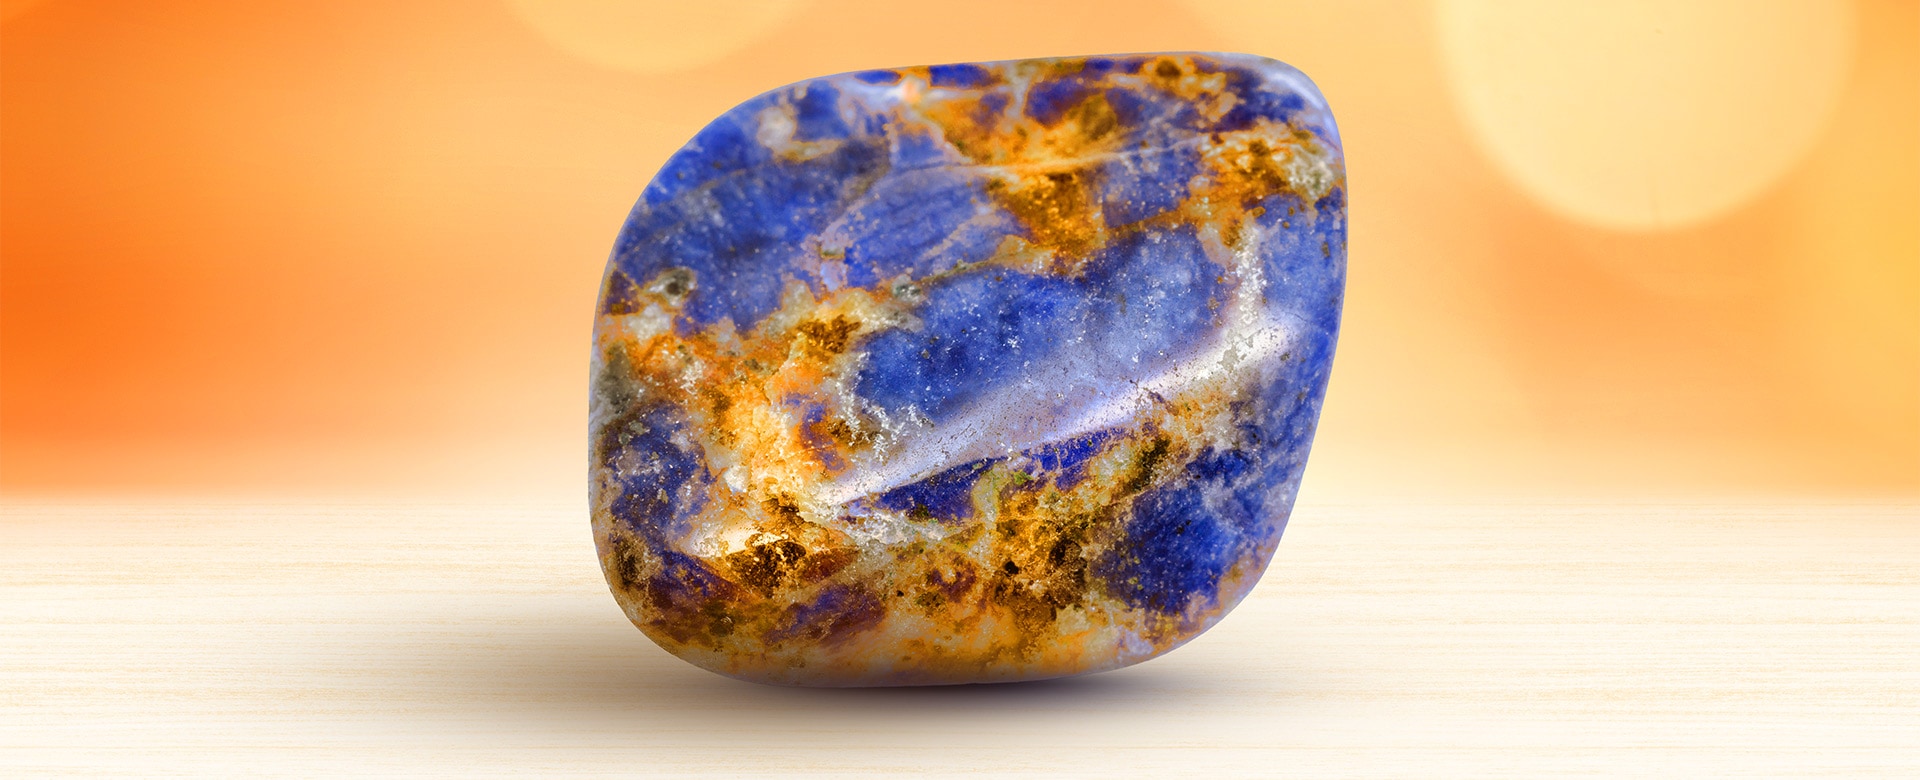 Orange Sodalite Meaning and Properties 1